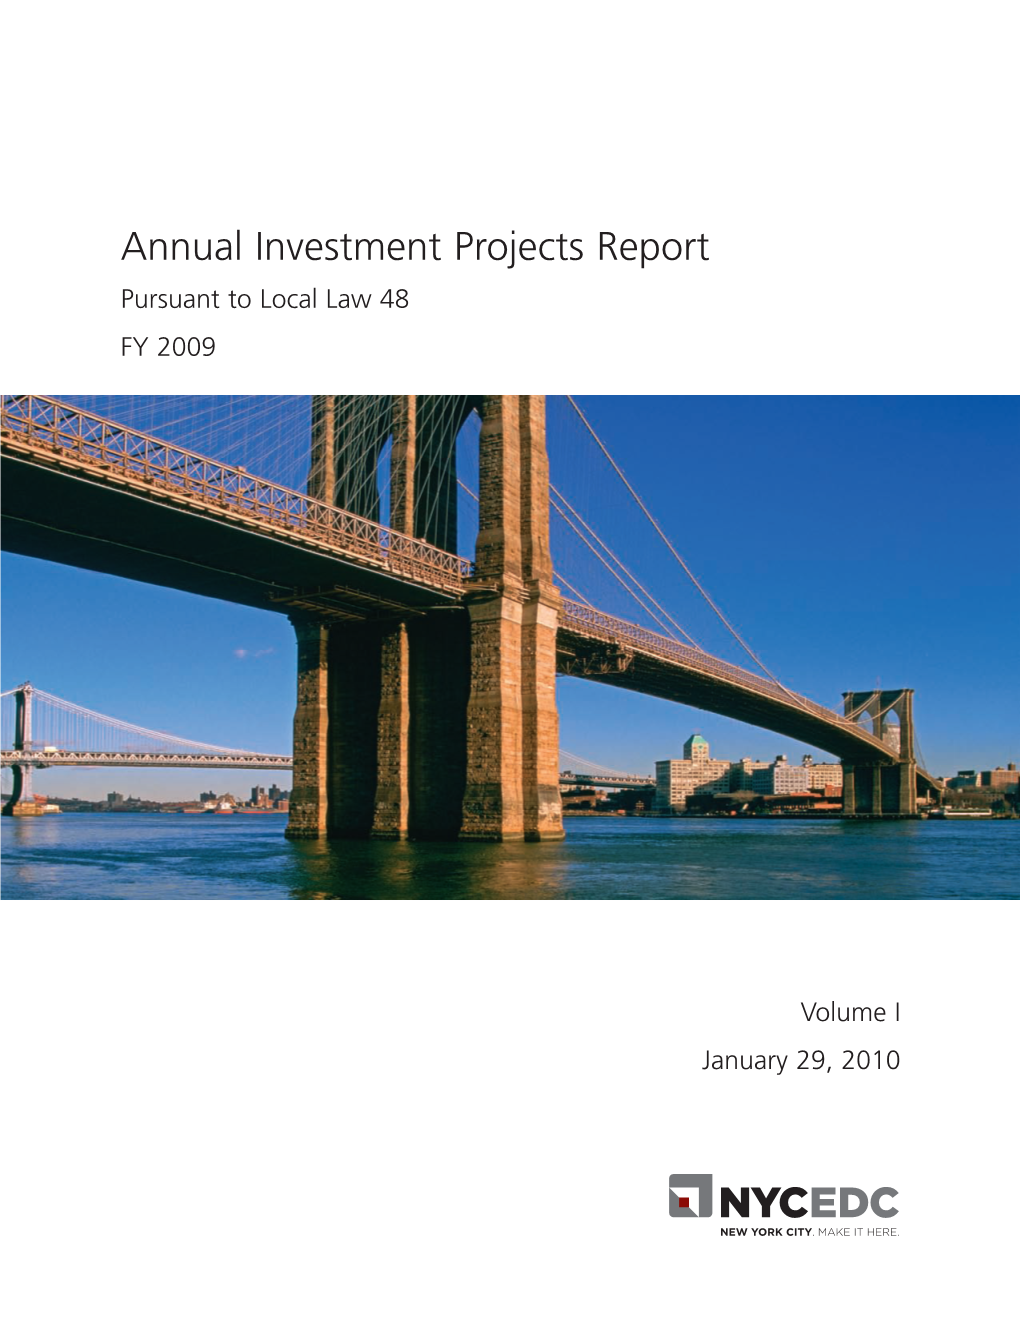 Annual Investment Projects Report Pursuant to Local Law 48 FY 2009